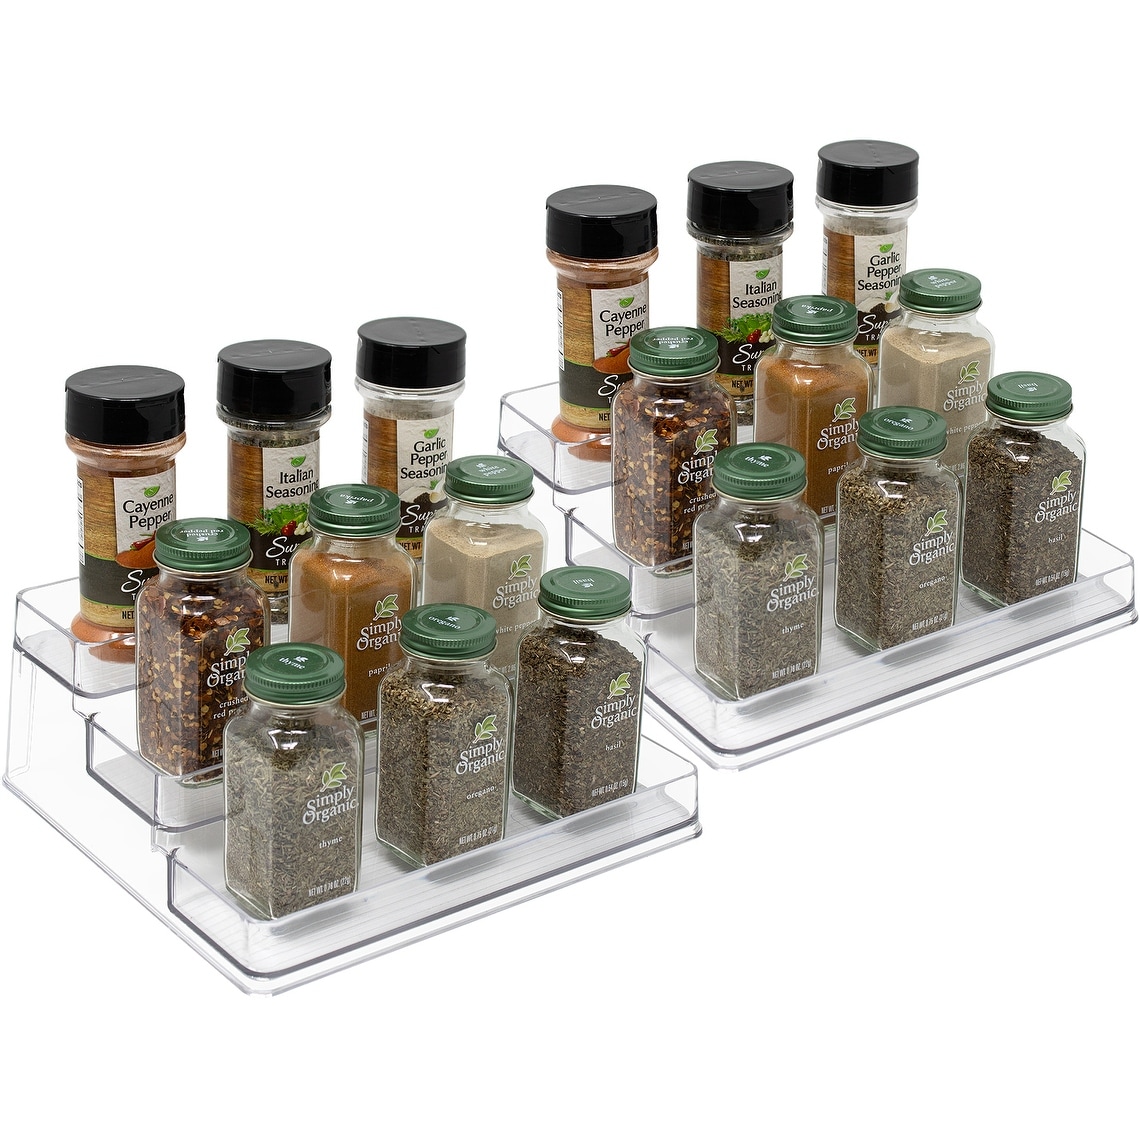 https://ak1.ostkcdn.com/images/products/is/images/direct/4a8fbef07a2255f6dc673856f8d15336bd3b10d9/3-Tier-Plastic-Spice-Rack---Countertop-Shelf-Organizer-for-Kitchen-Pantry-%282-Pk%29.jpg